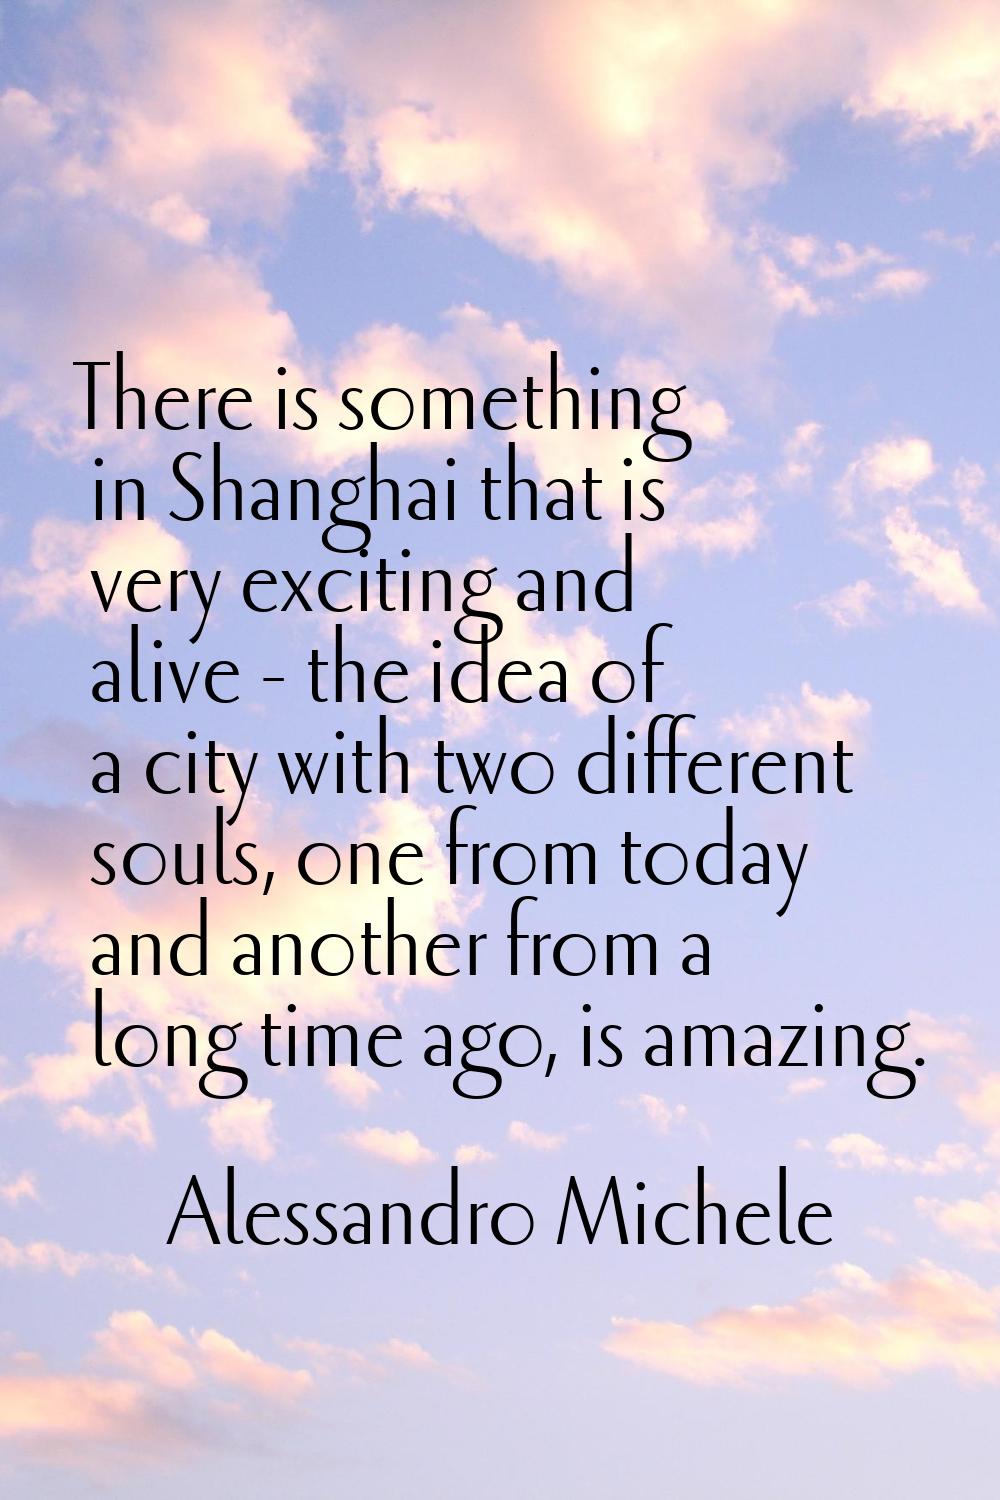 There is something in Shanghai that is very exciting and alive - the idea of a city with two differ